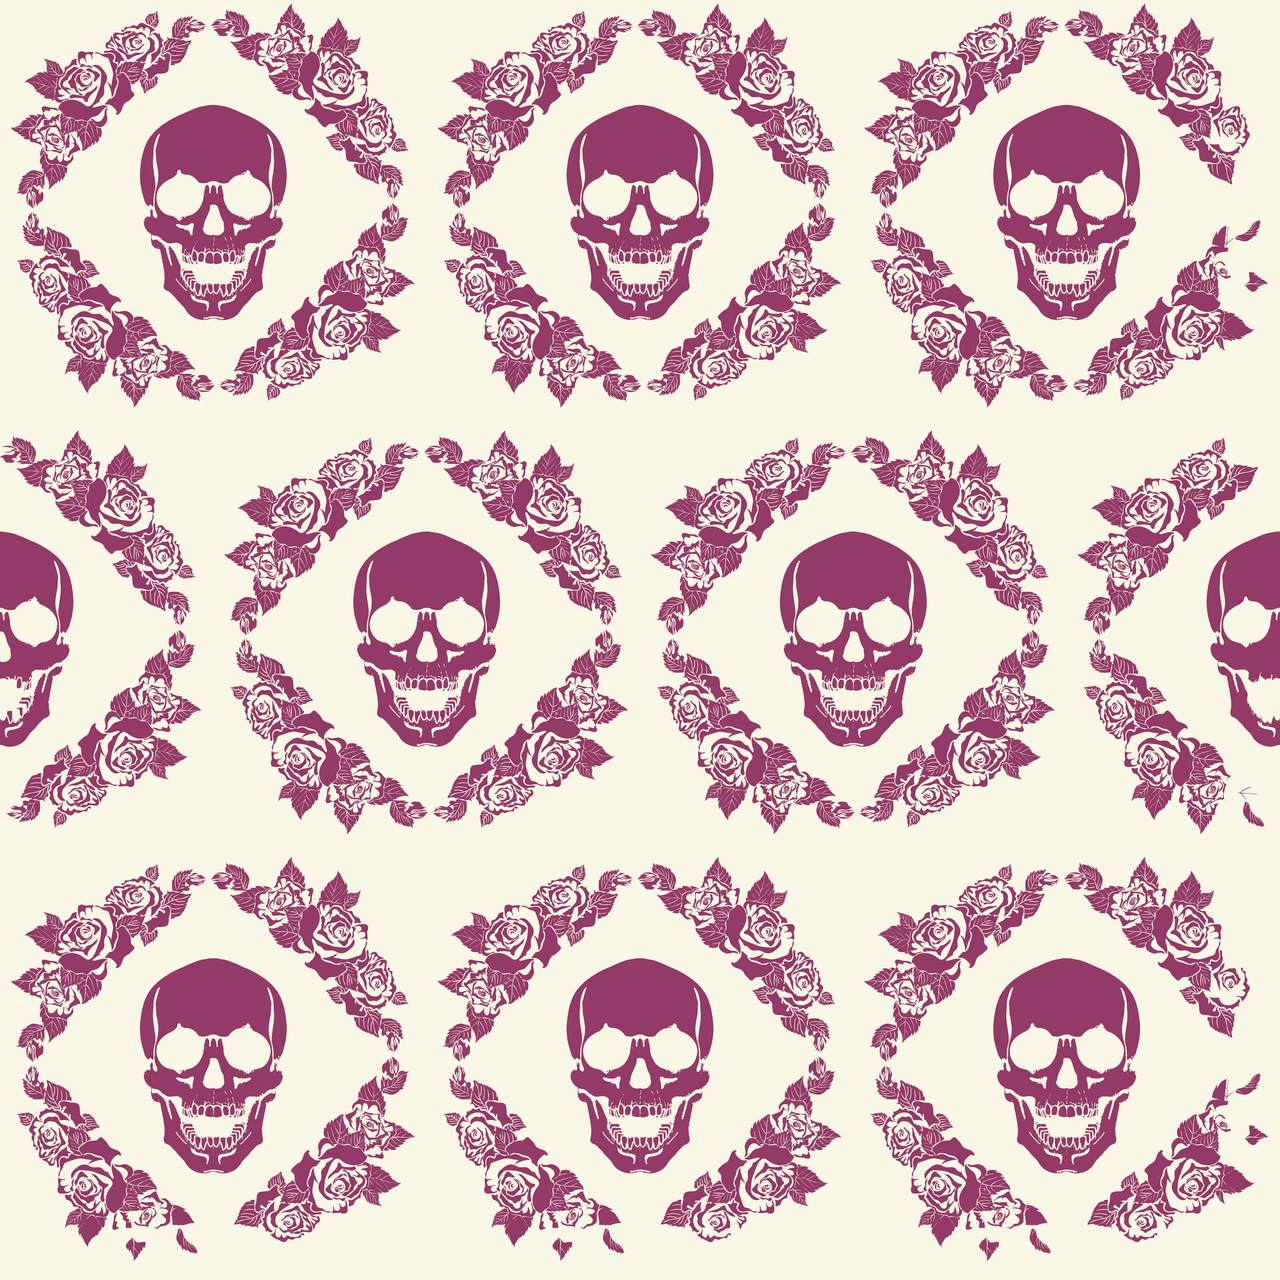 Background, Floral, And Flowers Image - Skull - HD Wallpaper 